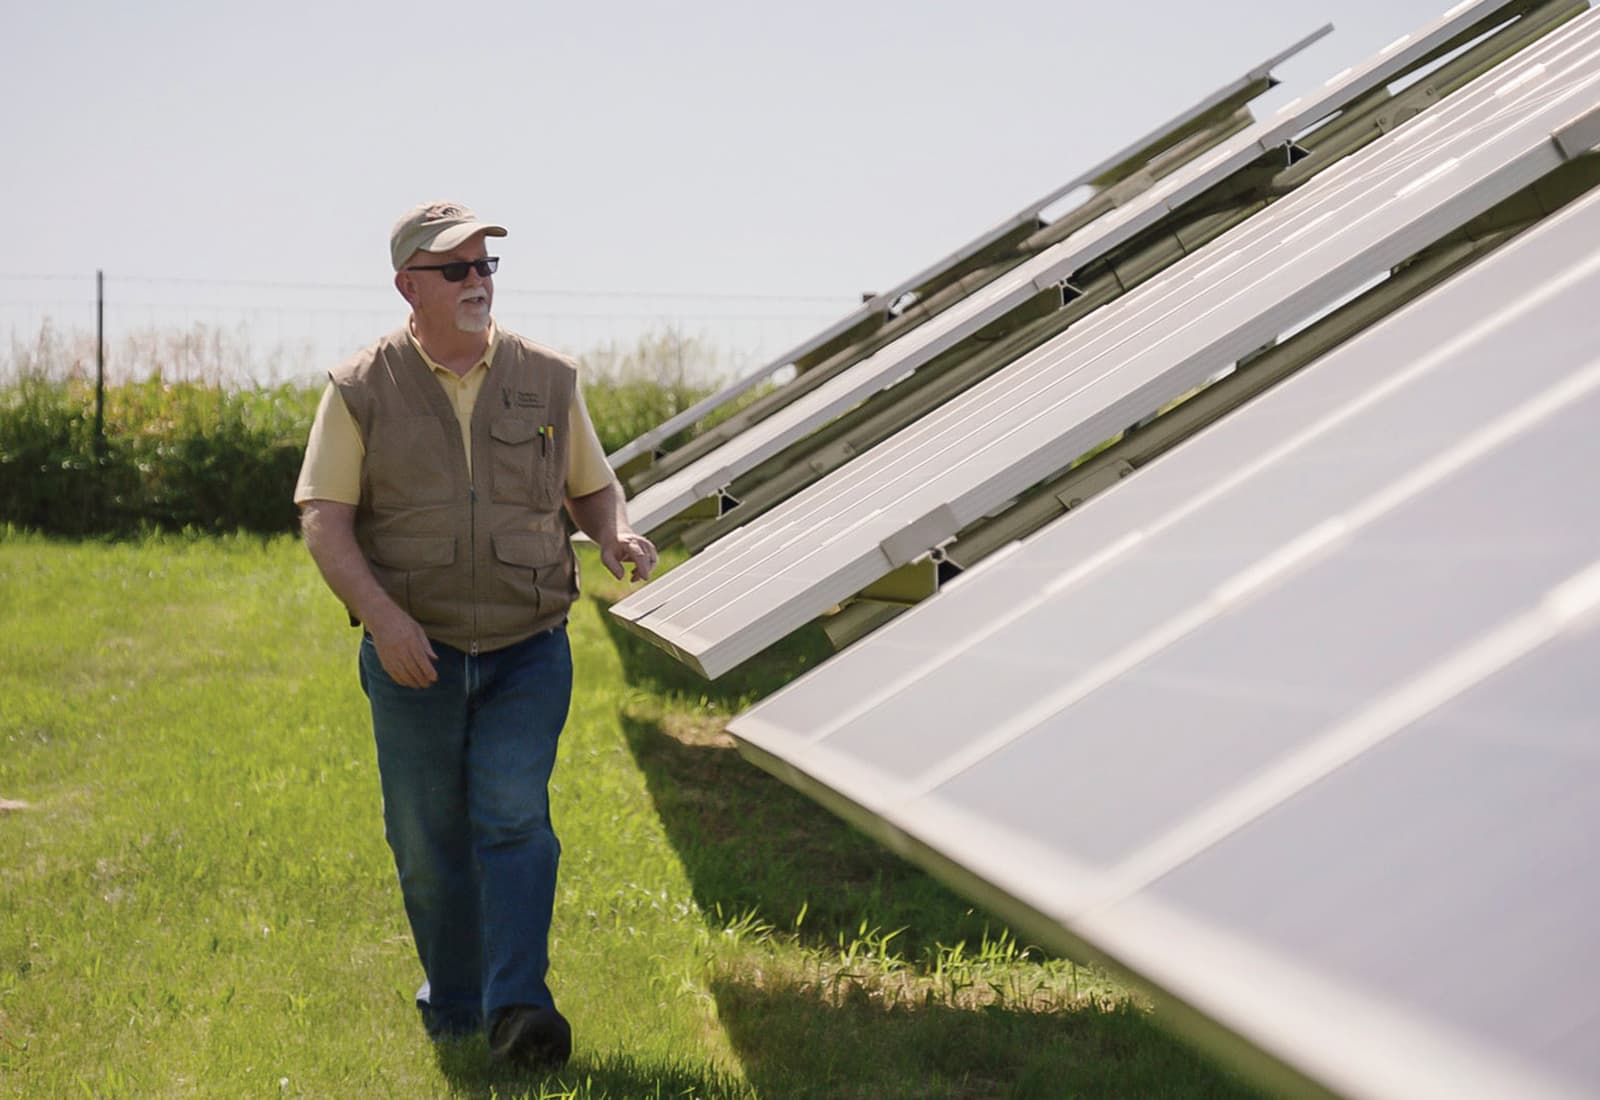 A scene of the solar farm at Farmers Electric Cooperative in Kalona, Iowa from the film "Paris to Pittsburgh," produced by Bloomberg Philanthropies in parntership with Radical Media, and distributed by National Geographic Channel.